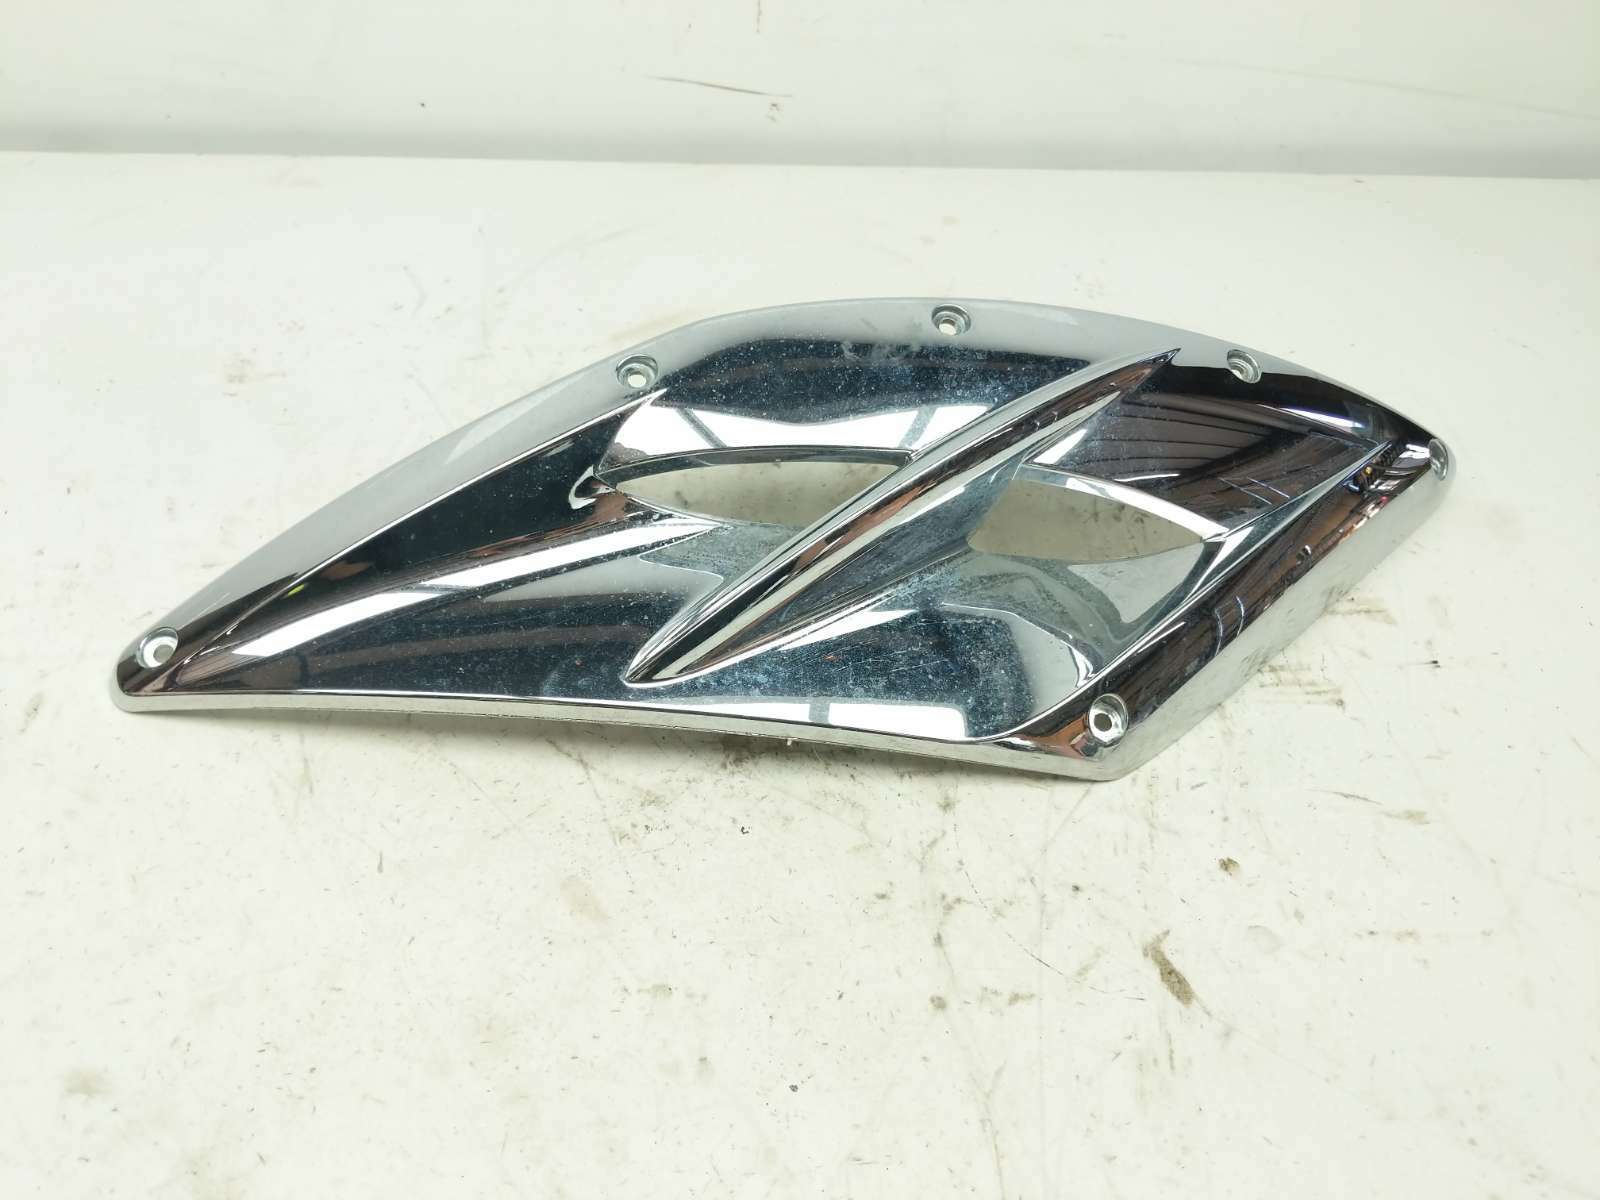 08 Seadoo RXP 255 Left Cowl Cowling Body Cover Panel Trim Plastic 273000197